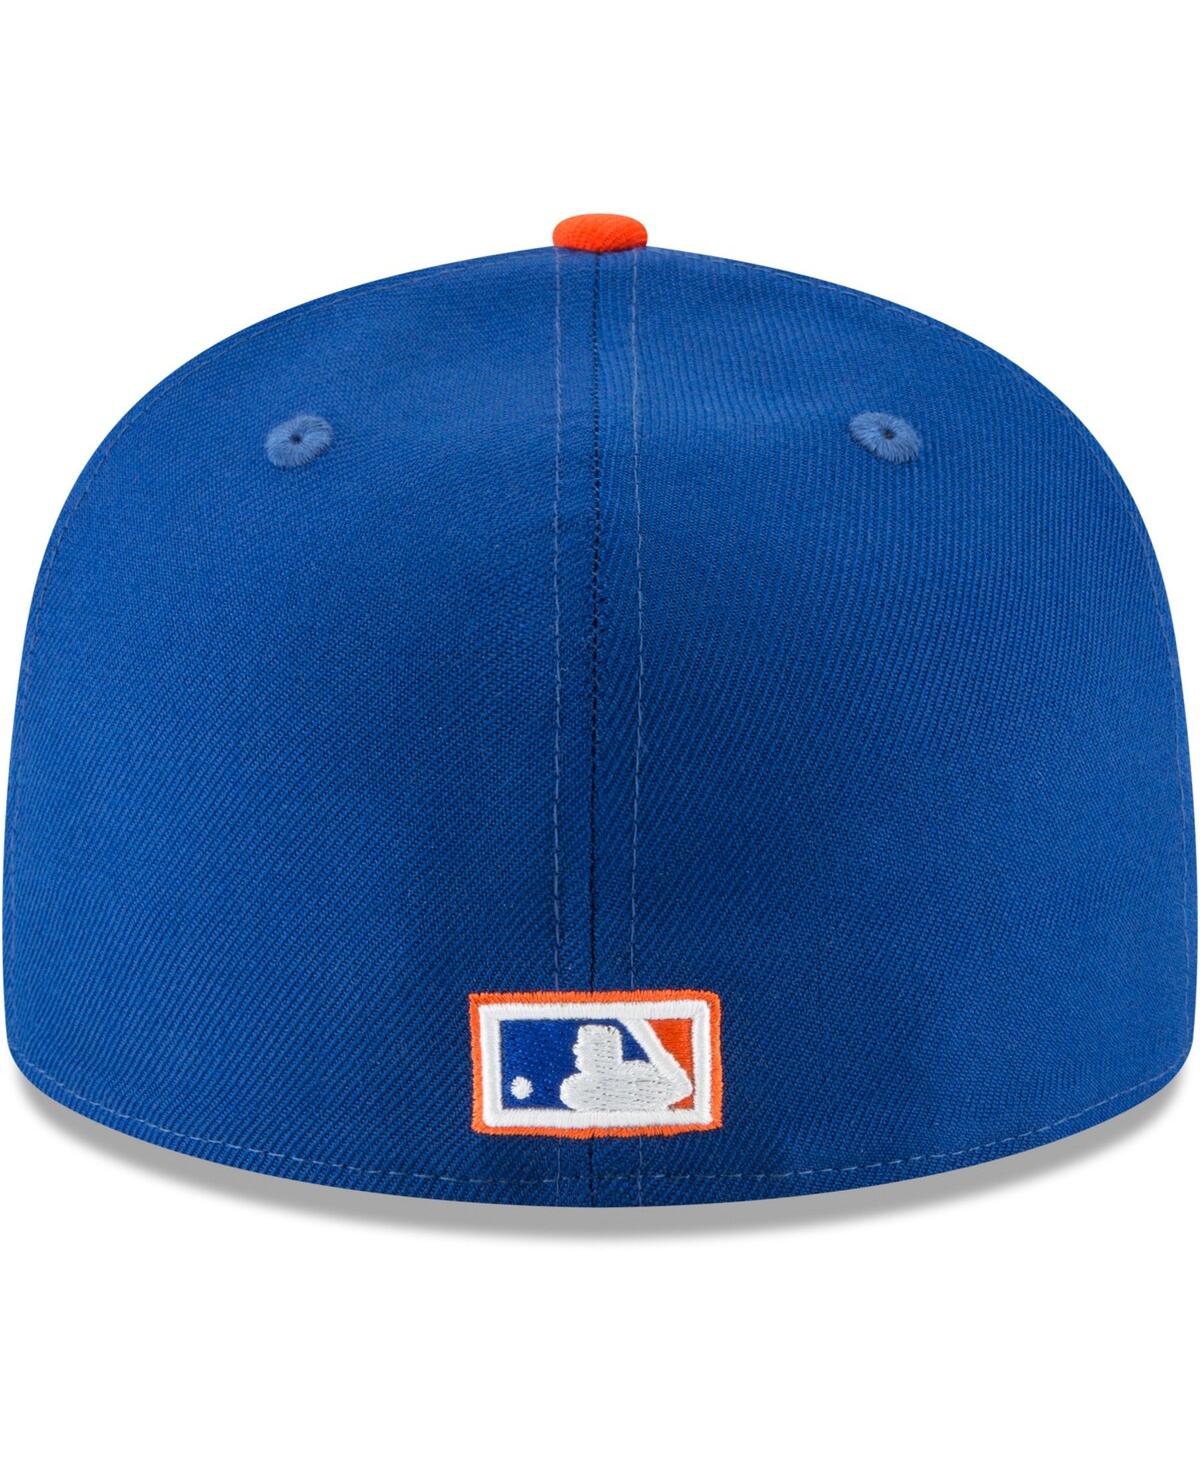 Shop New Era Men's  Blue New York Mets Cooperstown Collection Wool 59fifty Fitted Hat